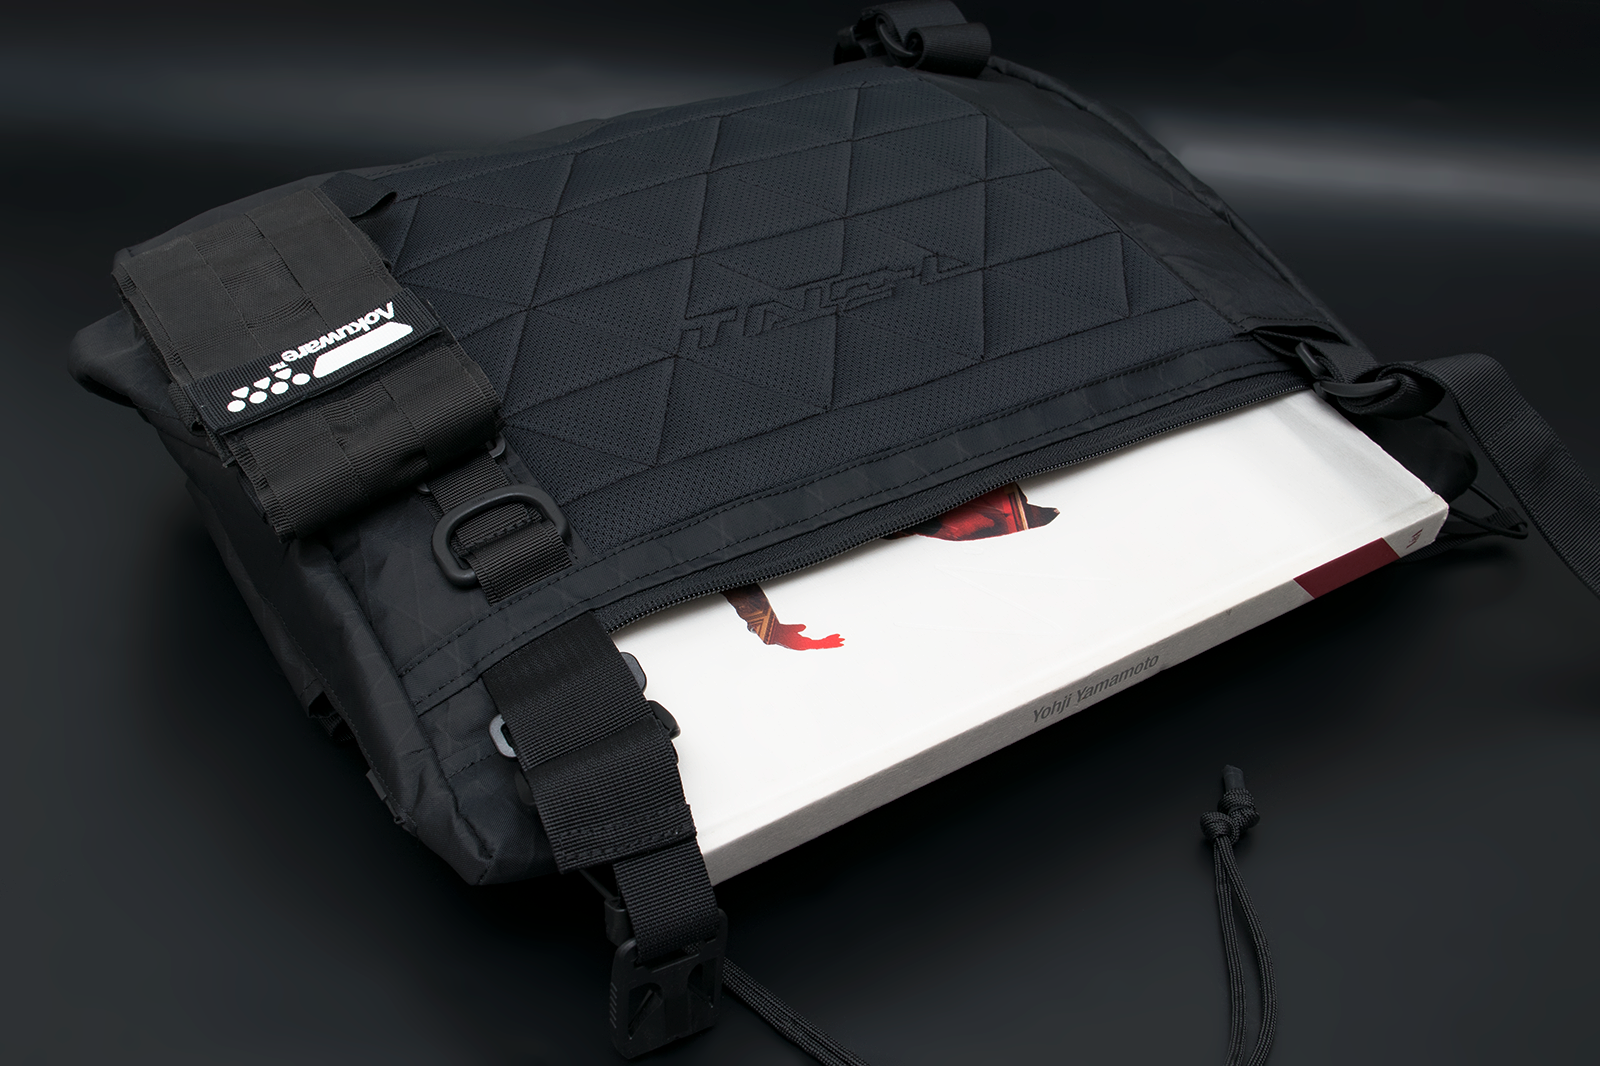 LAPTOP COMPARTMENT - FITS UP TO 16'' MBP / 061620 ON VERTICAL TEC-SYS